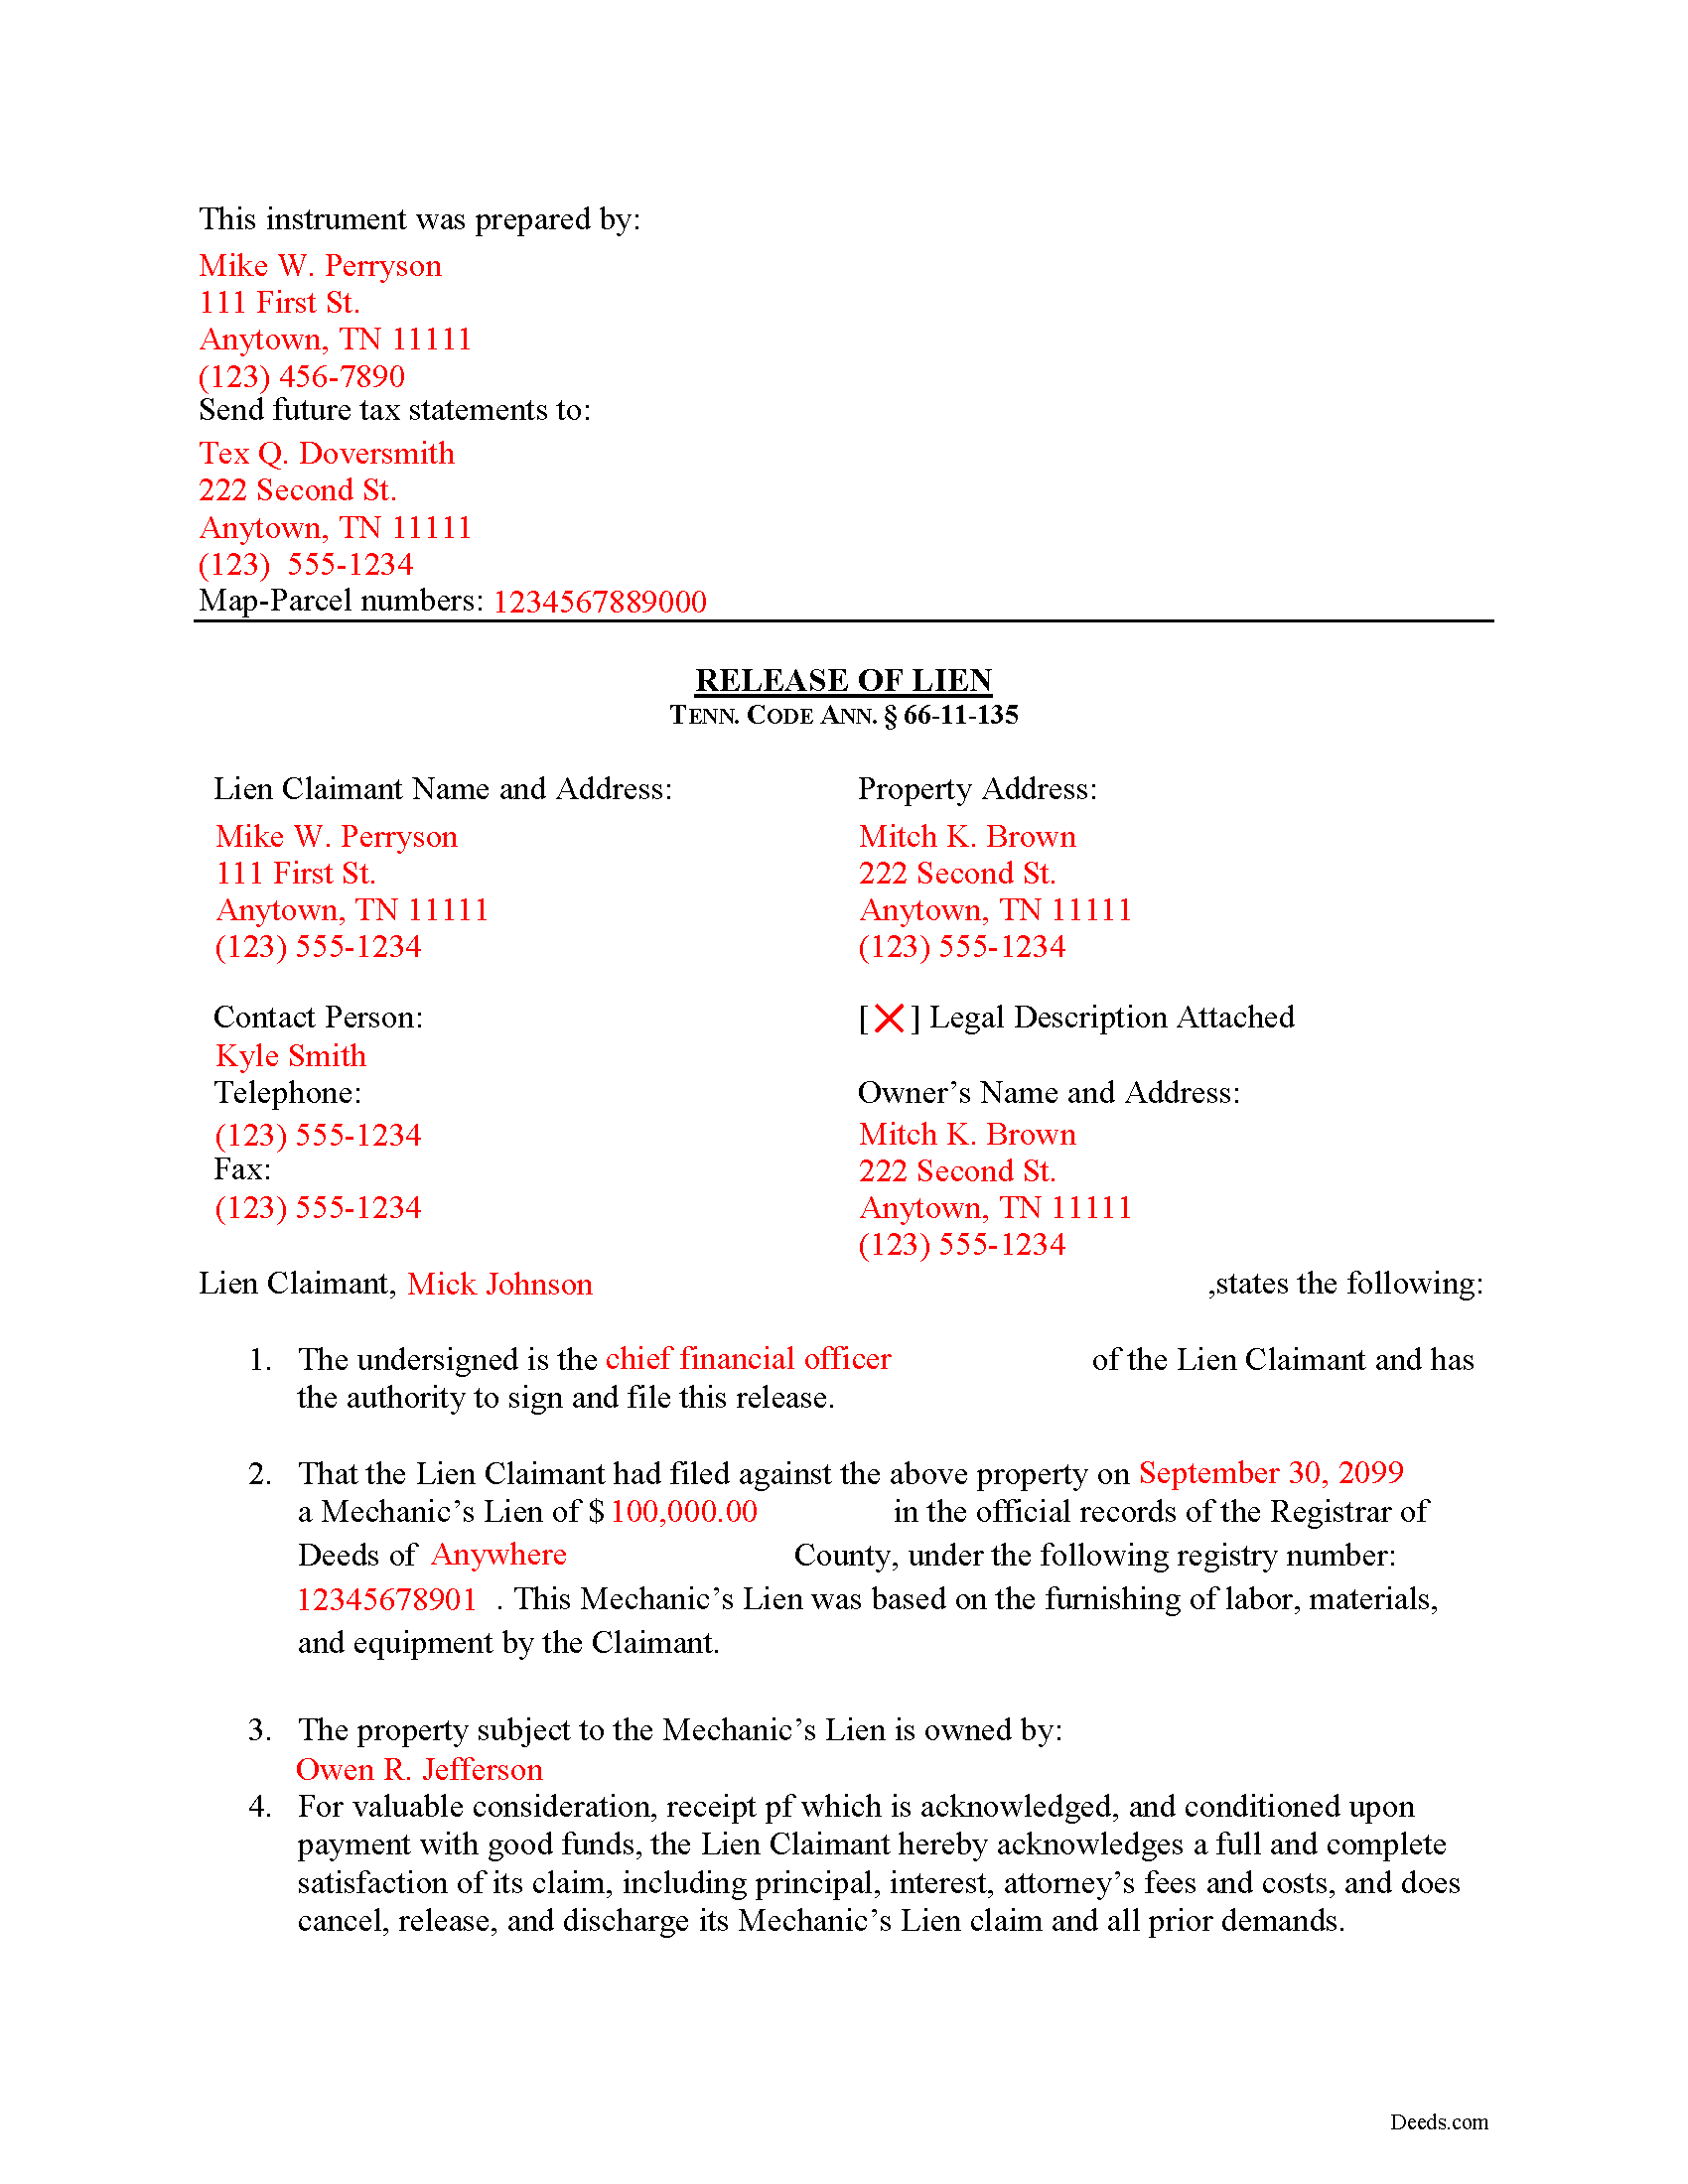 Completed Example of the Release of Mechanic Lien Document